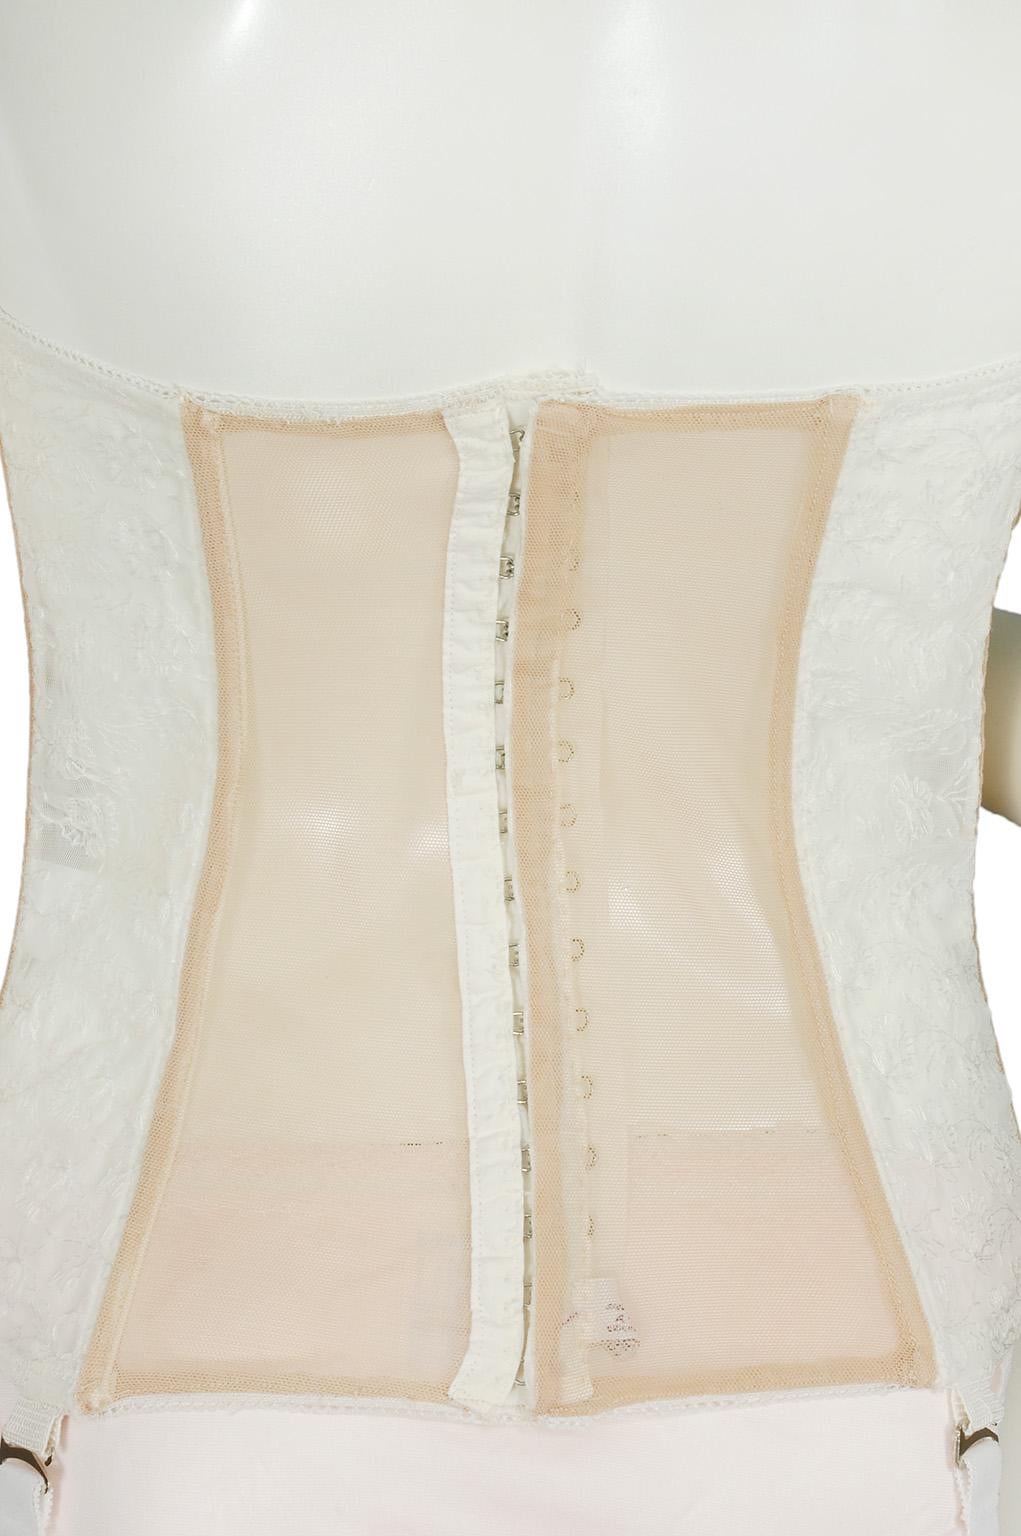 Sheer Ivory Embroidered Wedding Bustier Corset w Garter Straps – 38-44C, 1950s In Excellent Condition For Sale In Tucson, AZ